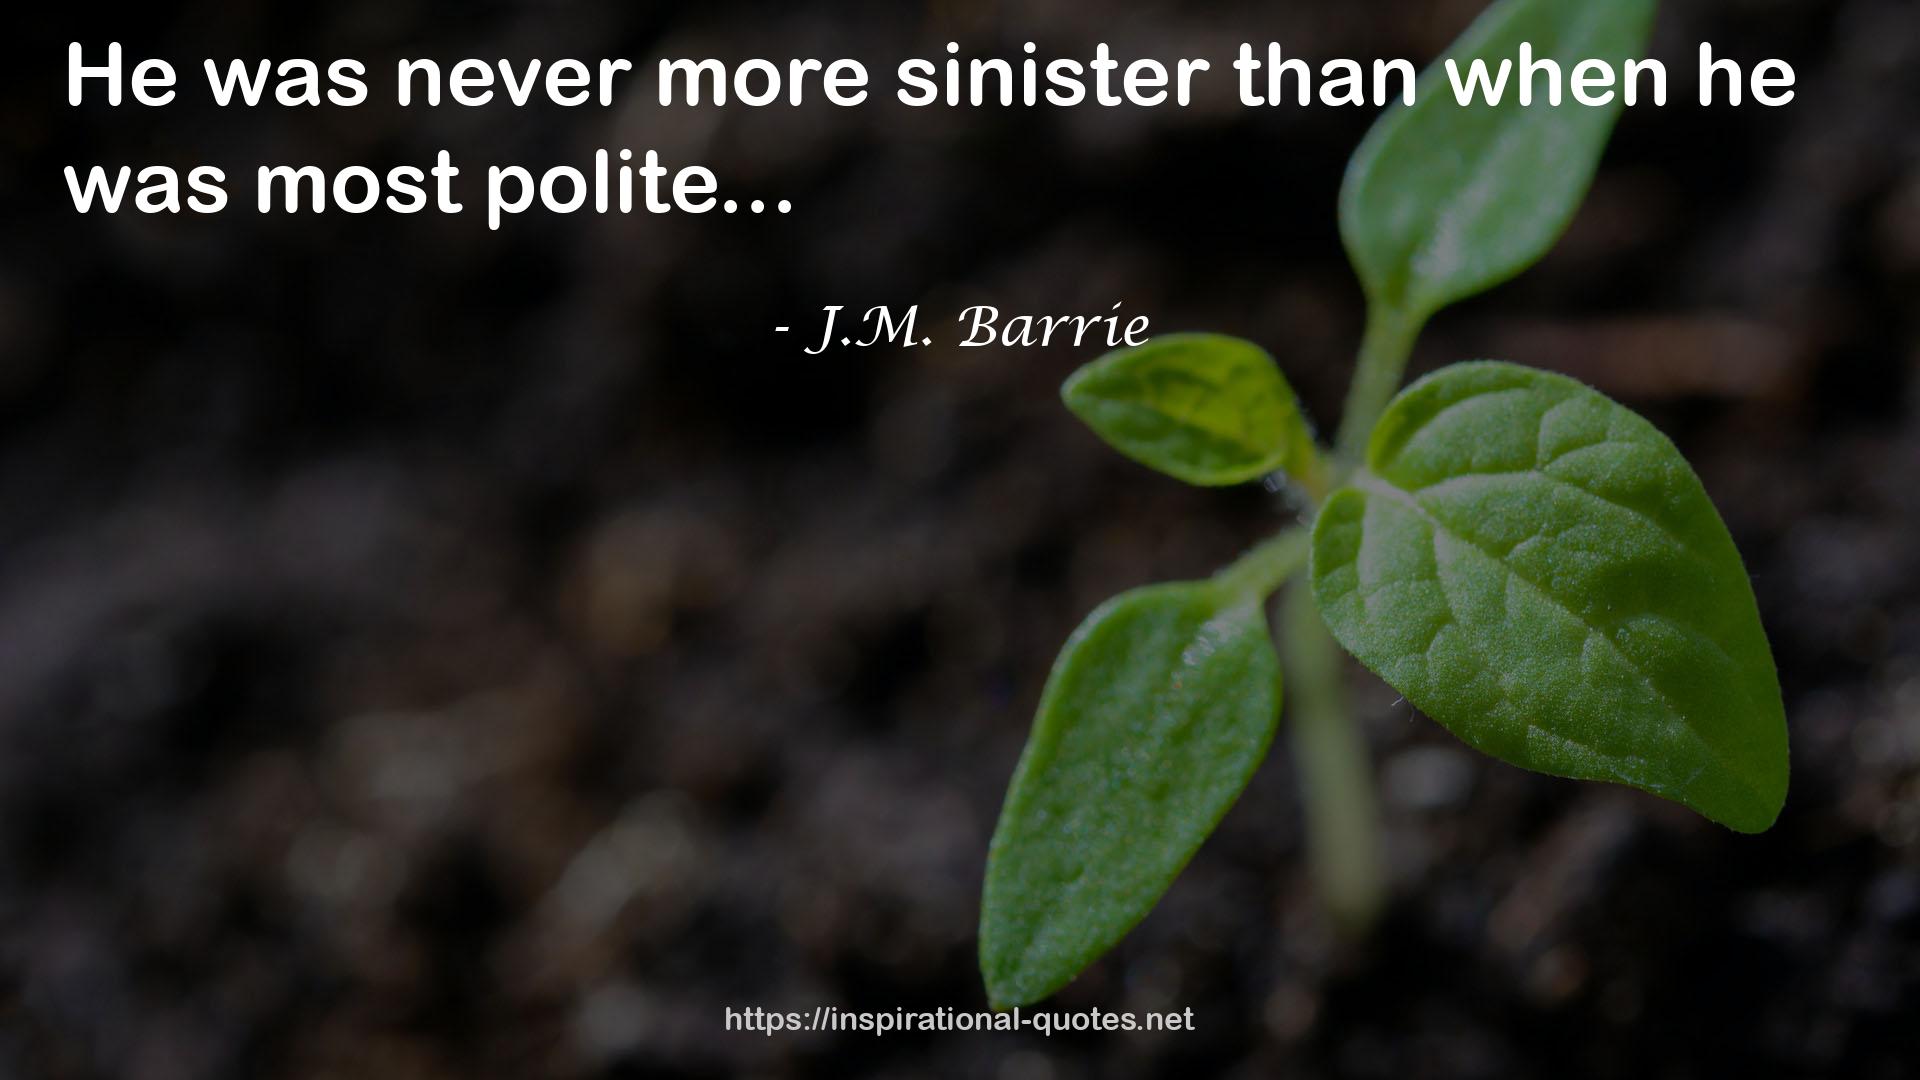 J.M. Barrie QUOTES